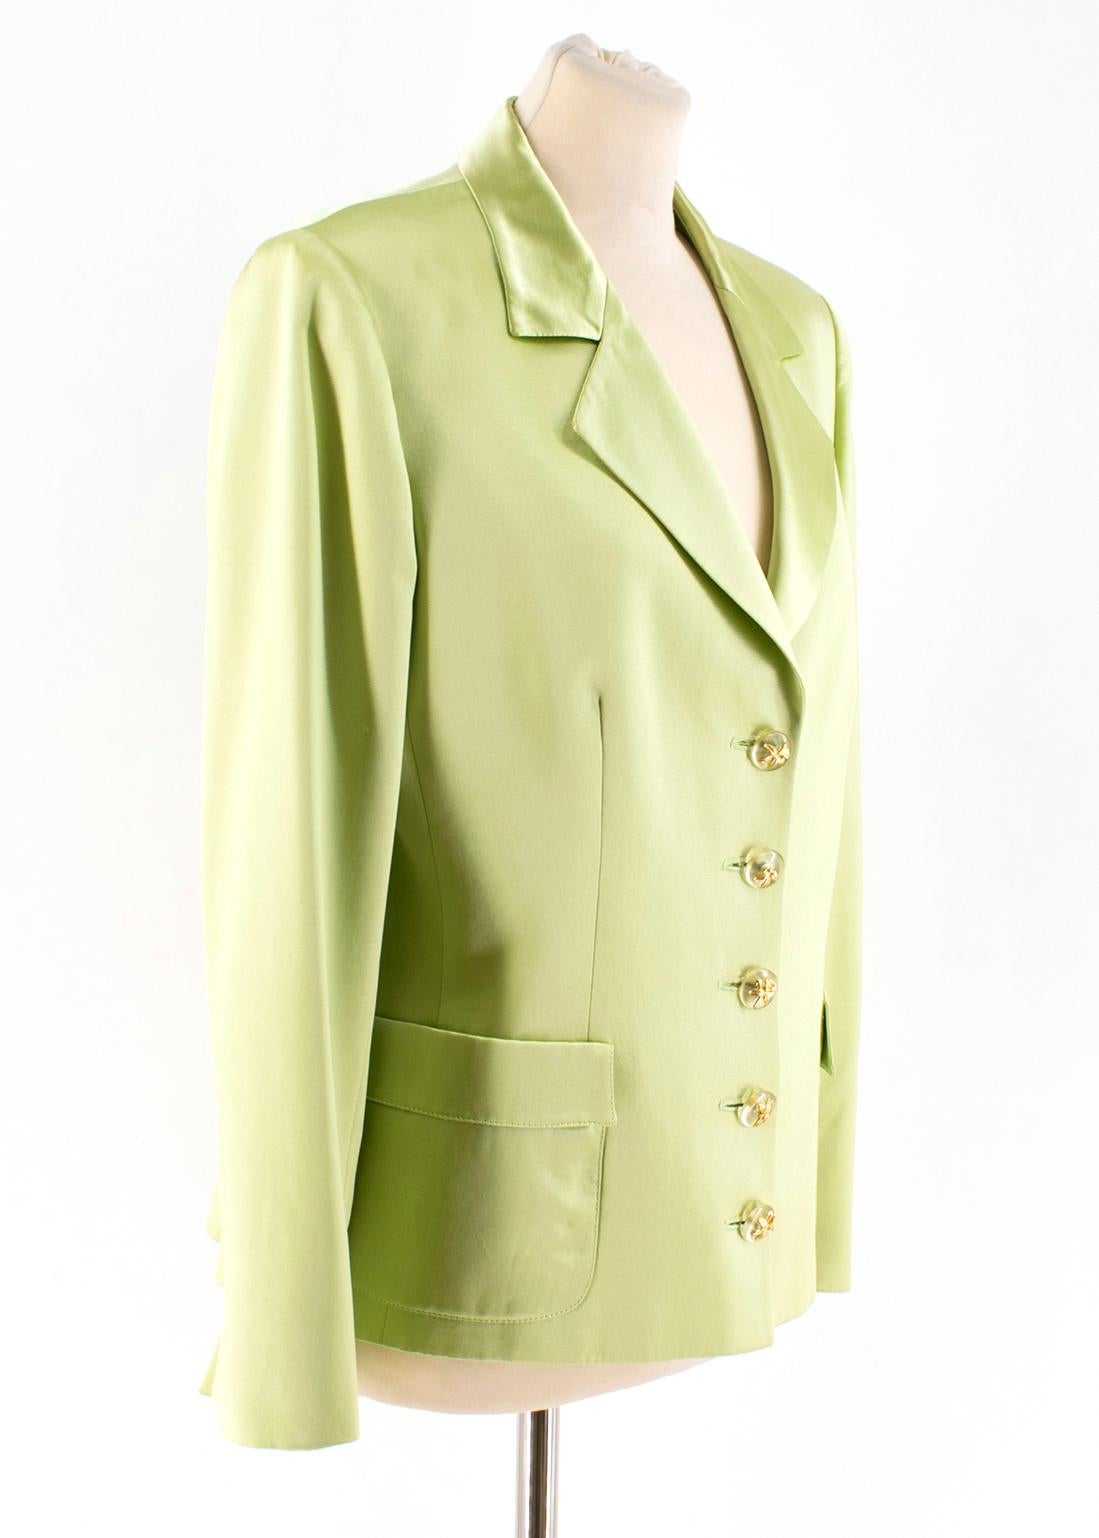 Valentino Lime Green Wool & Silk-blend Blazer

- Lime green, lightweight, wool & silk-blend blazer
- Padded shoulders
- Notch lapels
- Centre-front embellished buttons fastening
- Front slip pockets
- 76% virgin wool and 24% silk.

Please note,